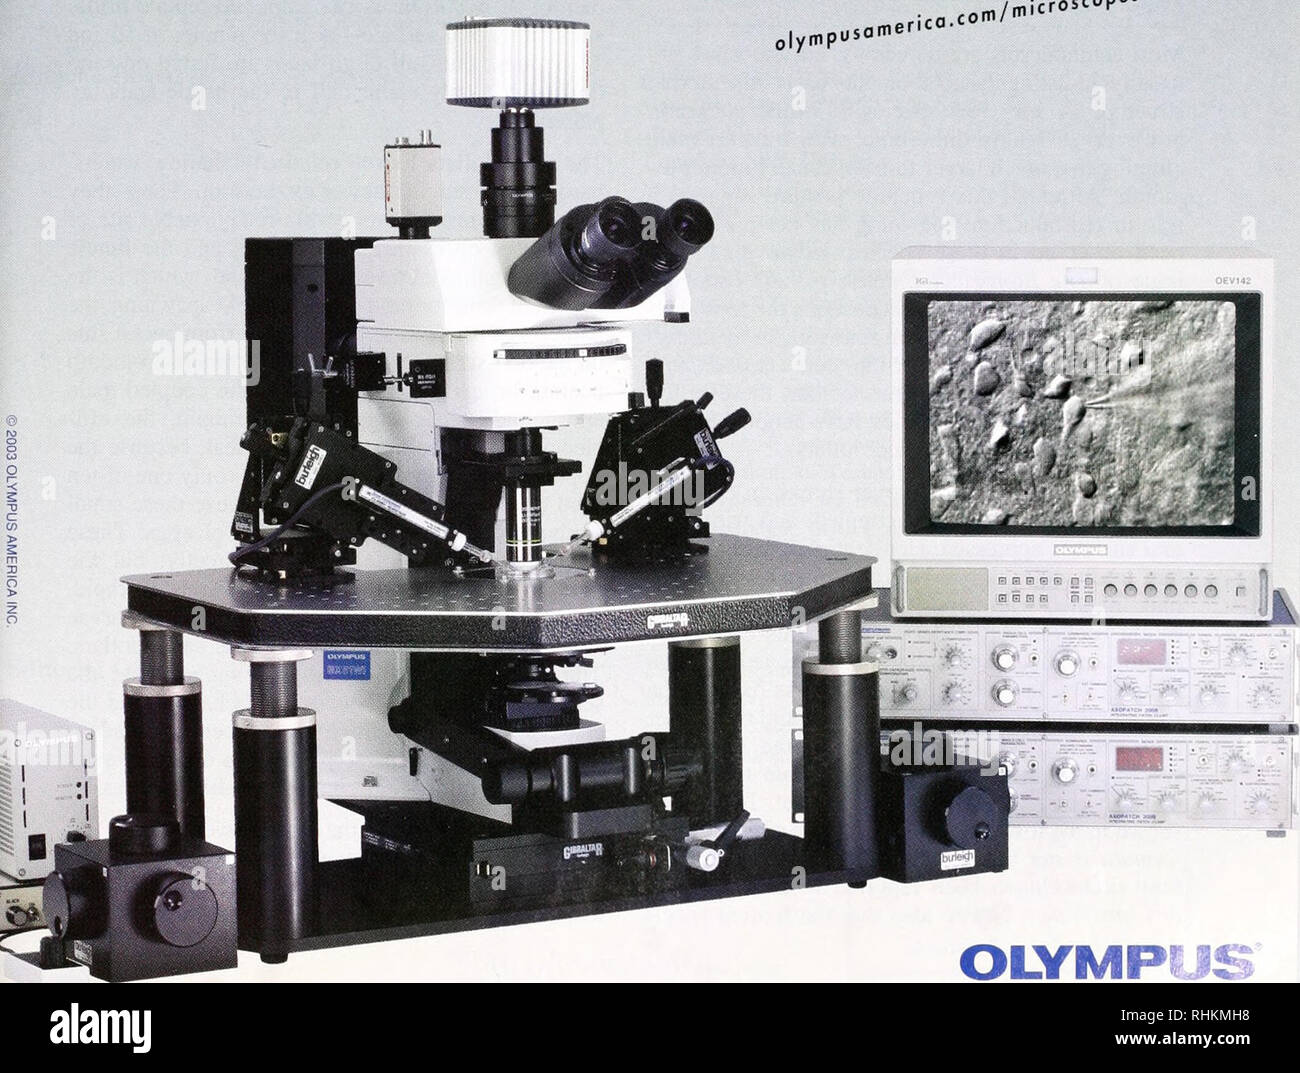 The Biological bulletin. Biology; Zoology; Biology; Marine Biology.  ELECTROPHYSIOLOGY RESEARCH MICROSCOPE. like the Olympus 8X51WI. The results  are superb orecence and DIG pabilities under the challenging conditions of  thick brain slice